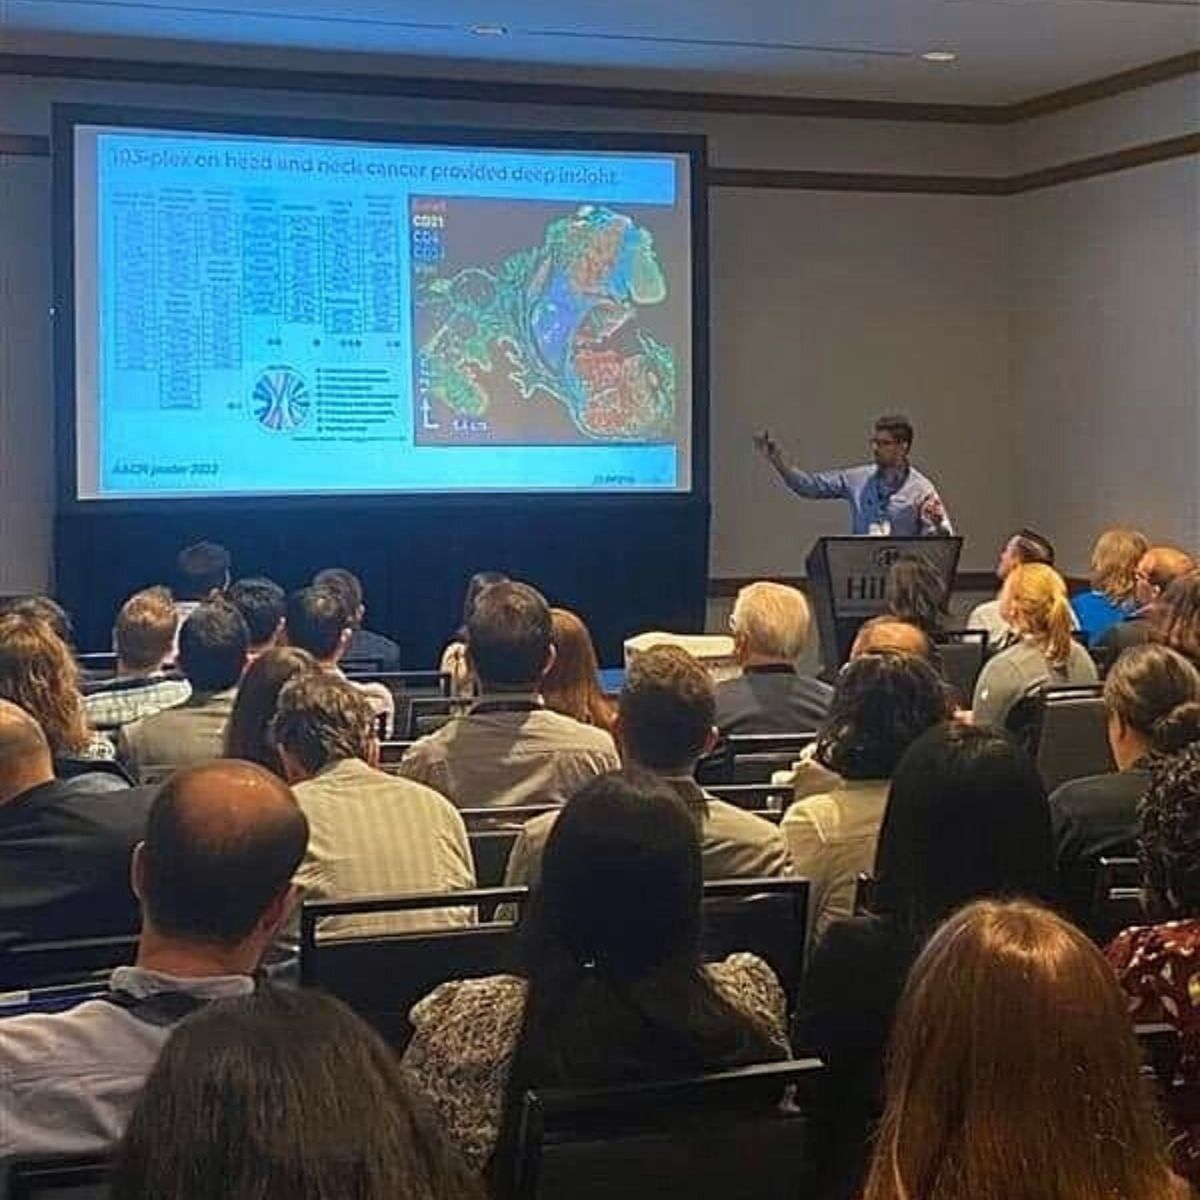 If you didn't attend #SpatialBiologyUS, then you're not serious about Spatial! #SpatialBiology US, hosted by @OGConferences included coverage of the latest spatial developments. 

Get a recap of the conference on our blog: bit.ly/3CuAPiG

#omicsseries22 @NextGenOmics